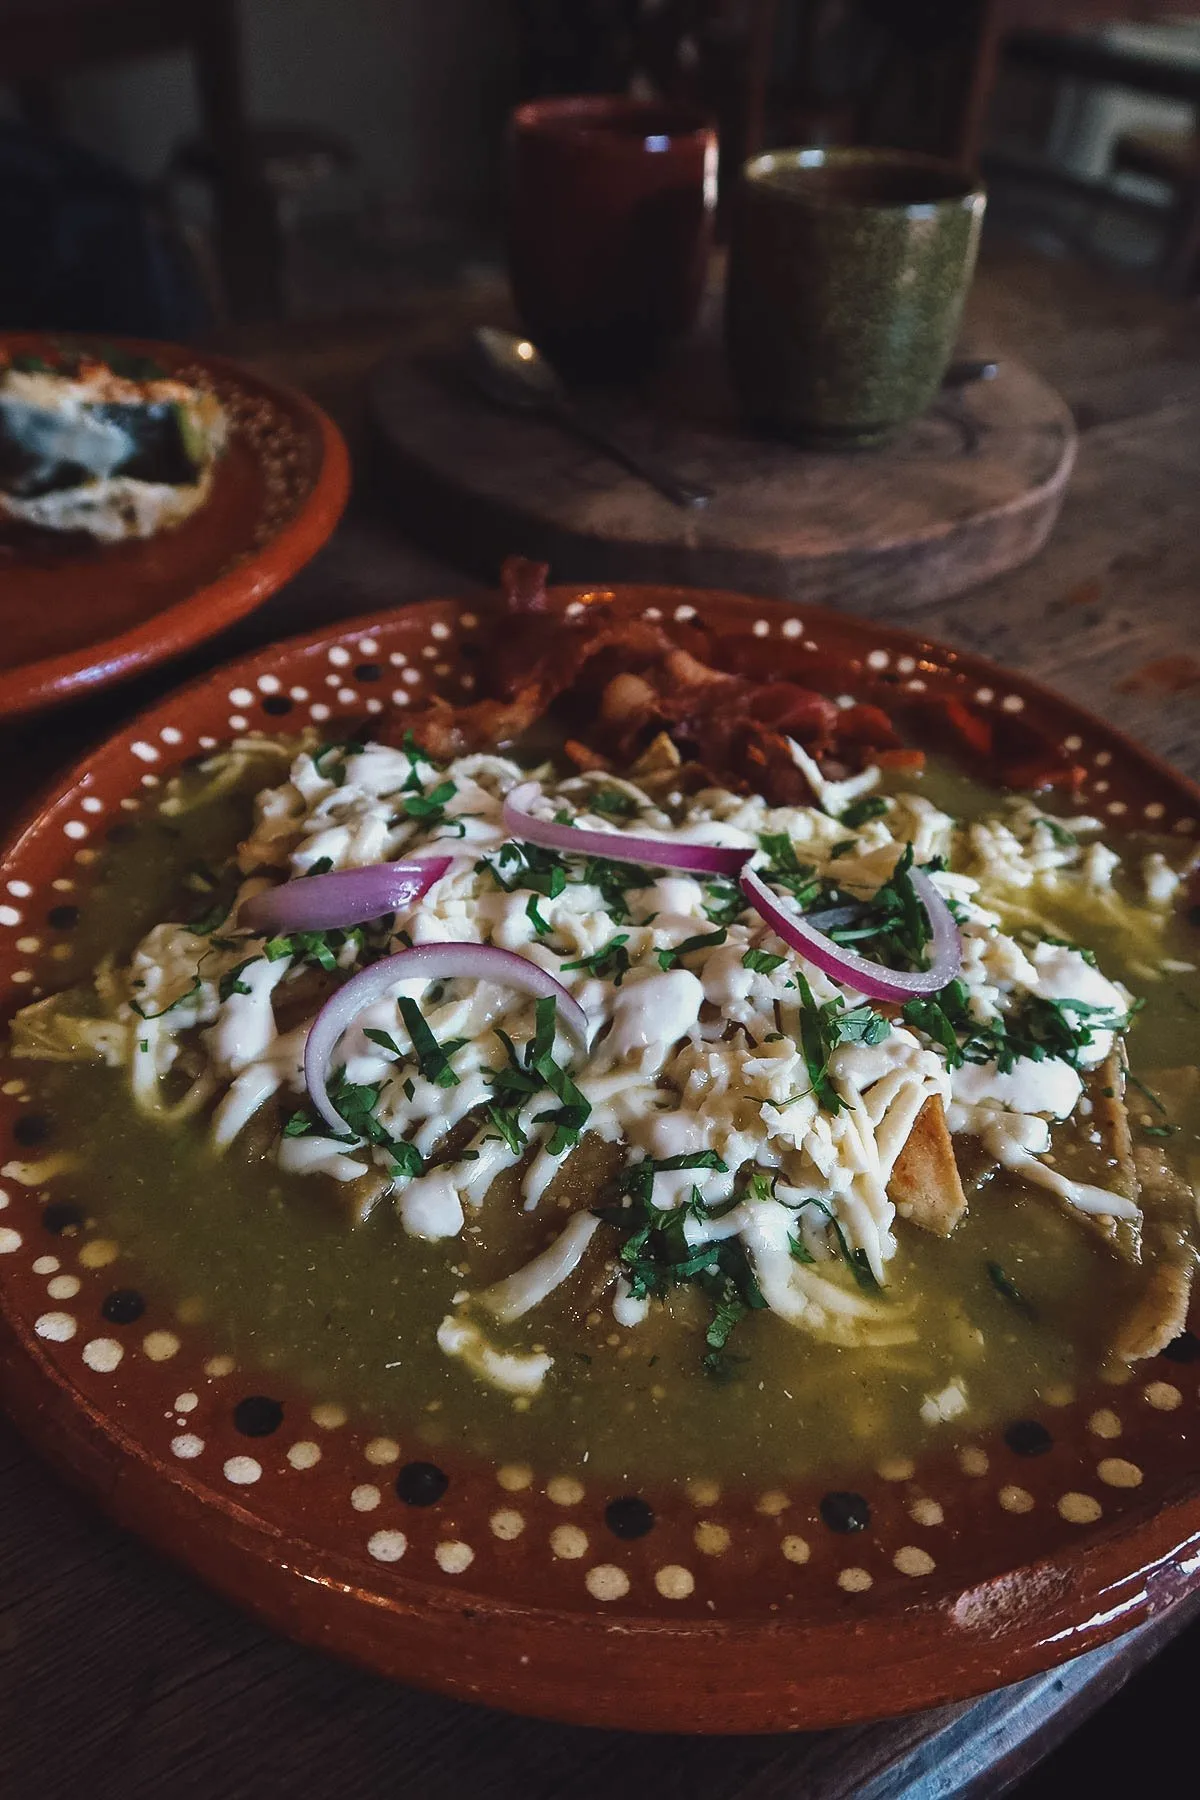 Chilaquiles verde, a classic Mexican breakfast dish